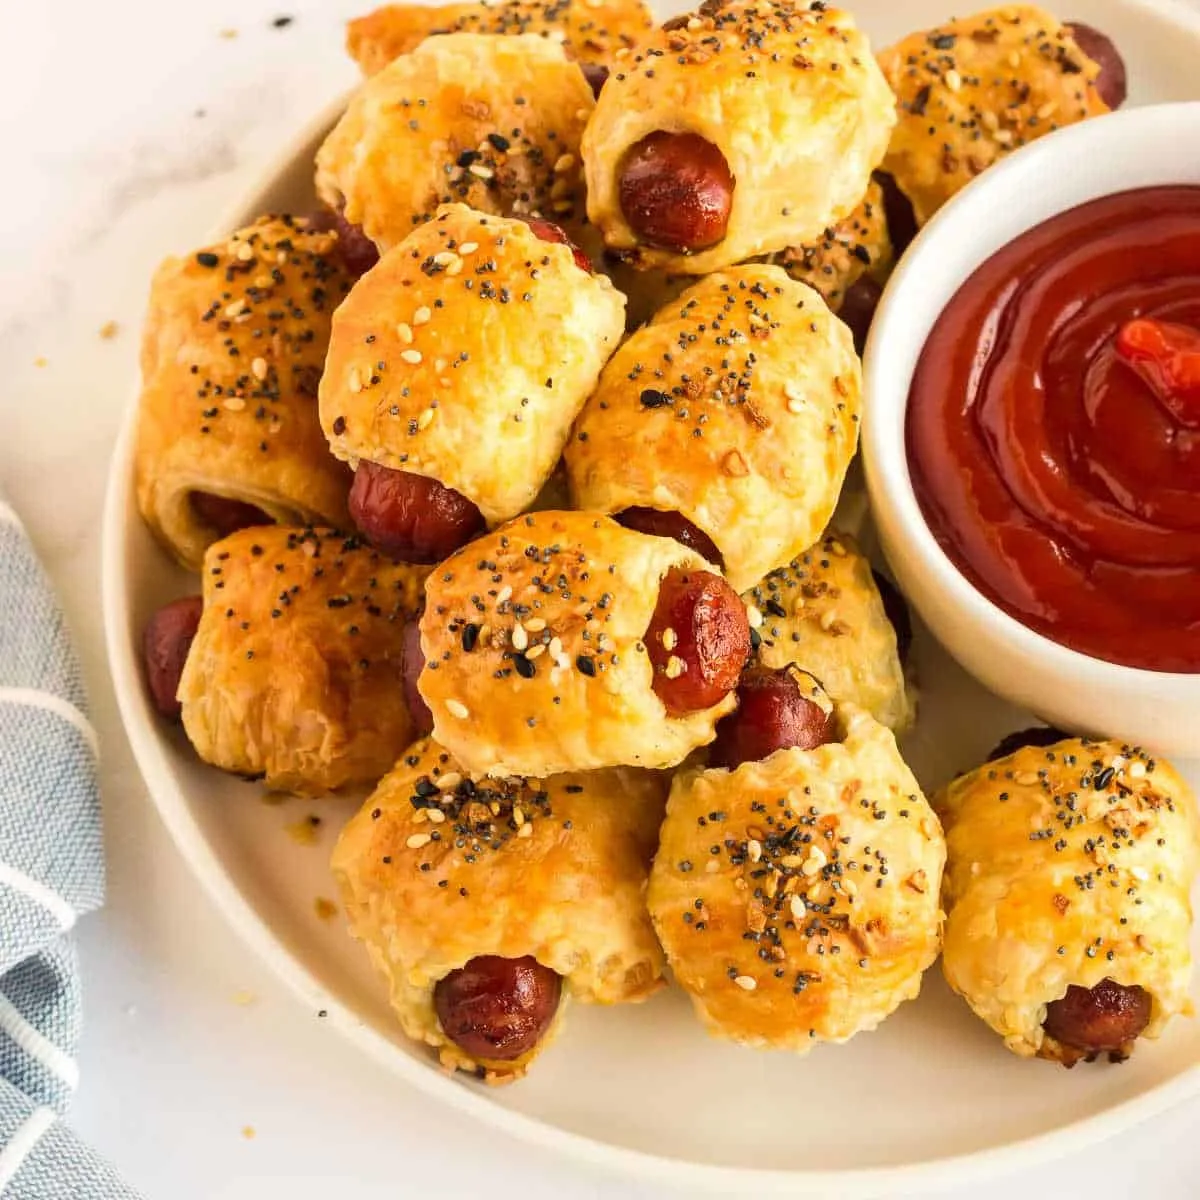 pigs in a blanket on a plate